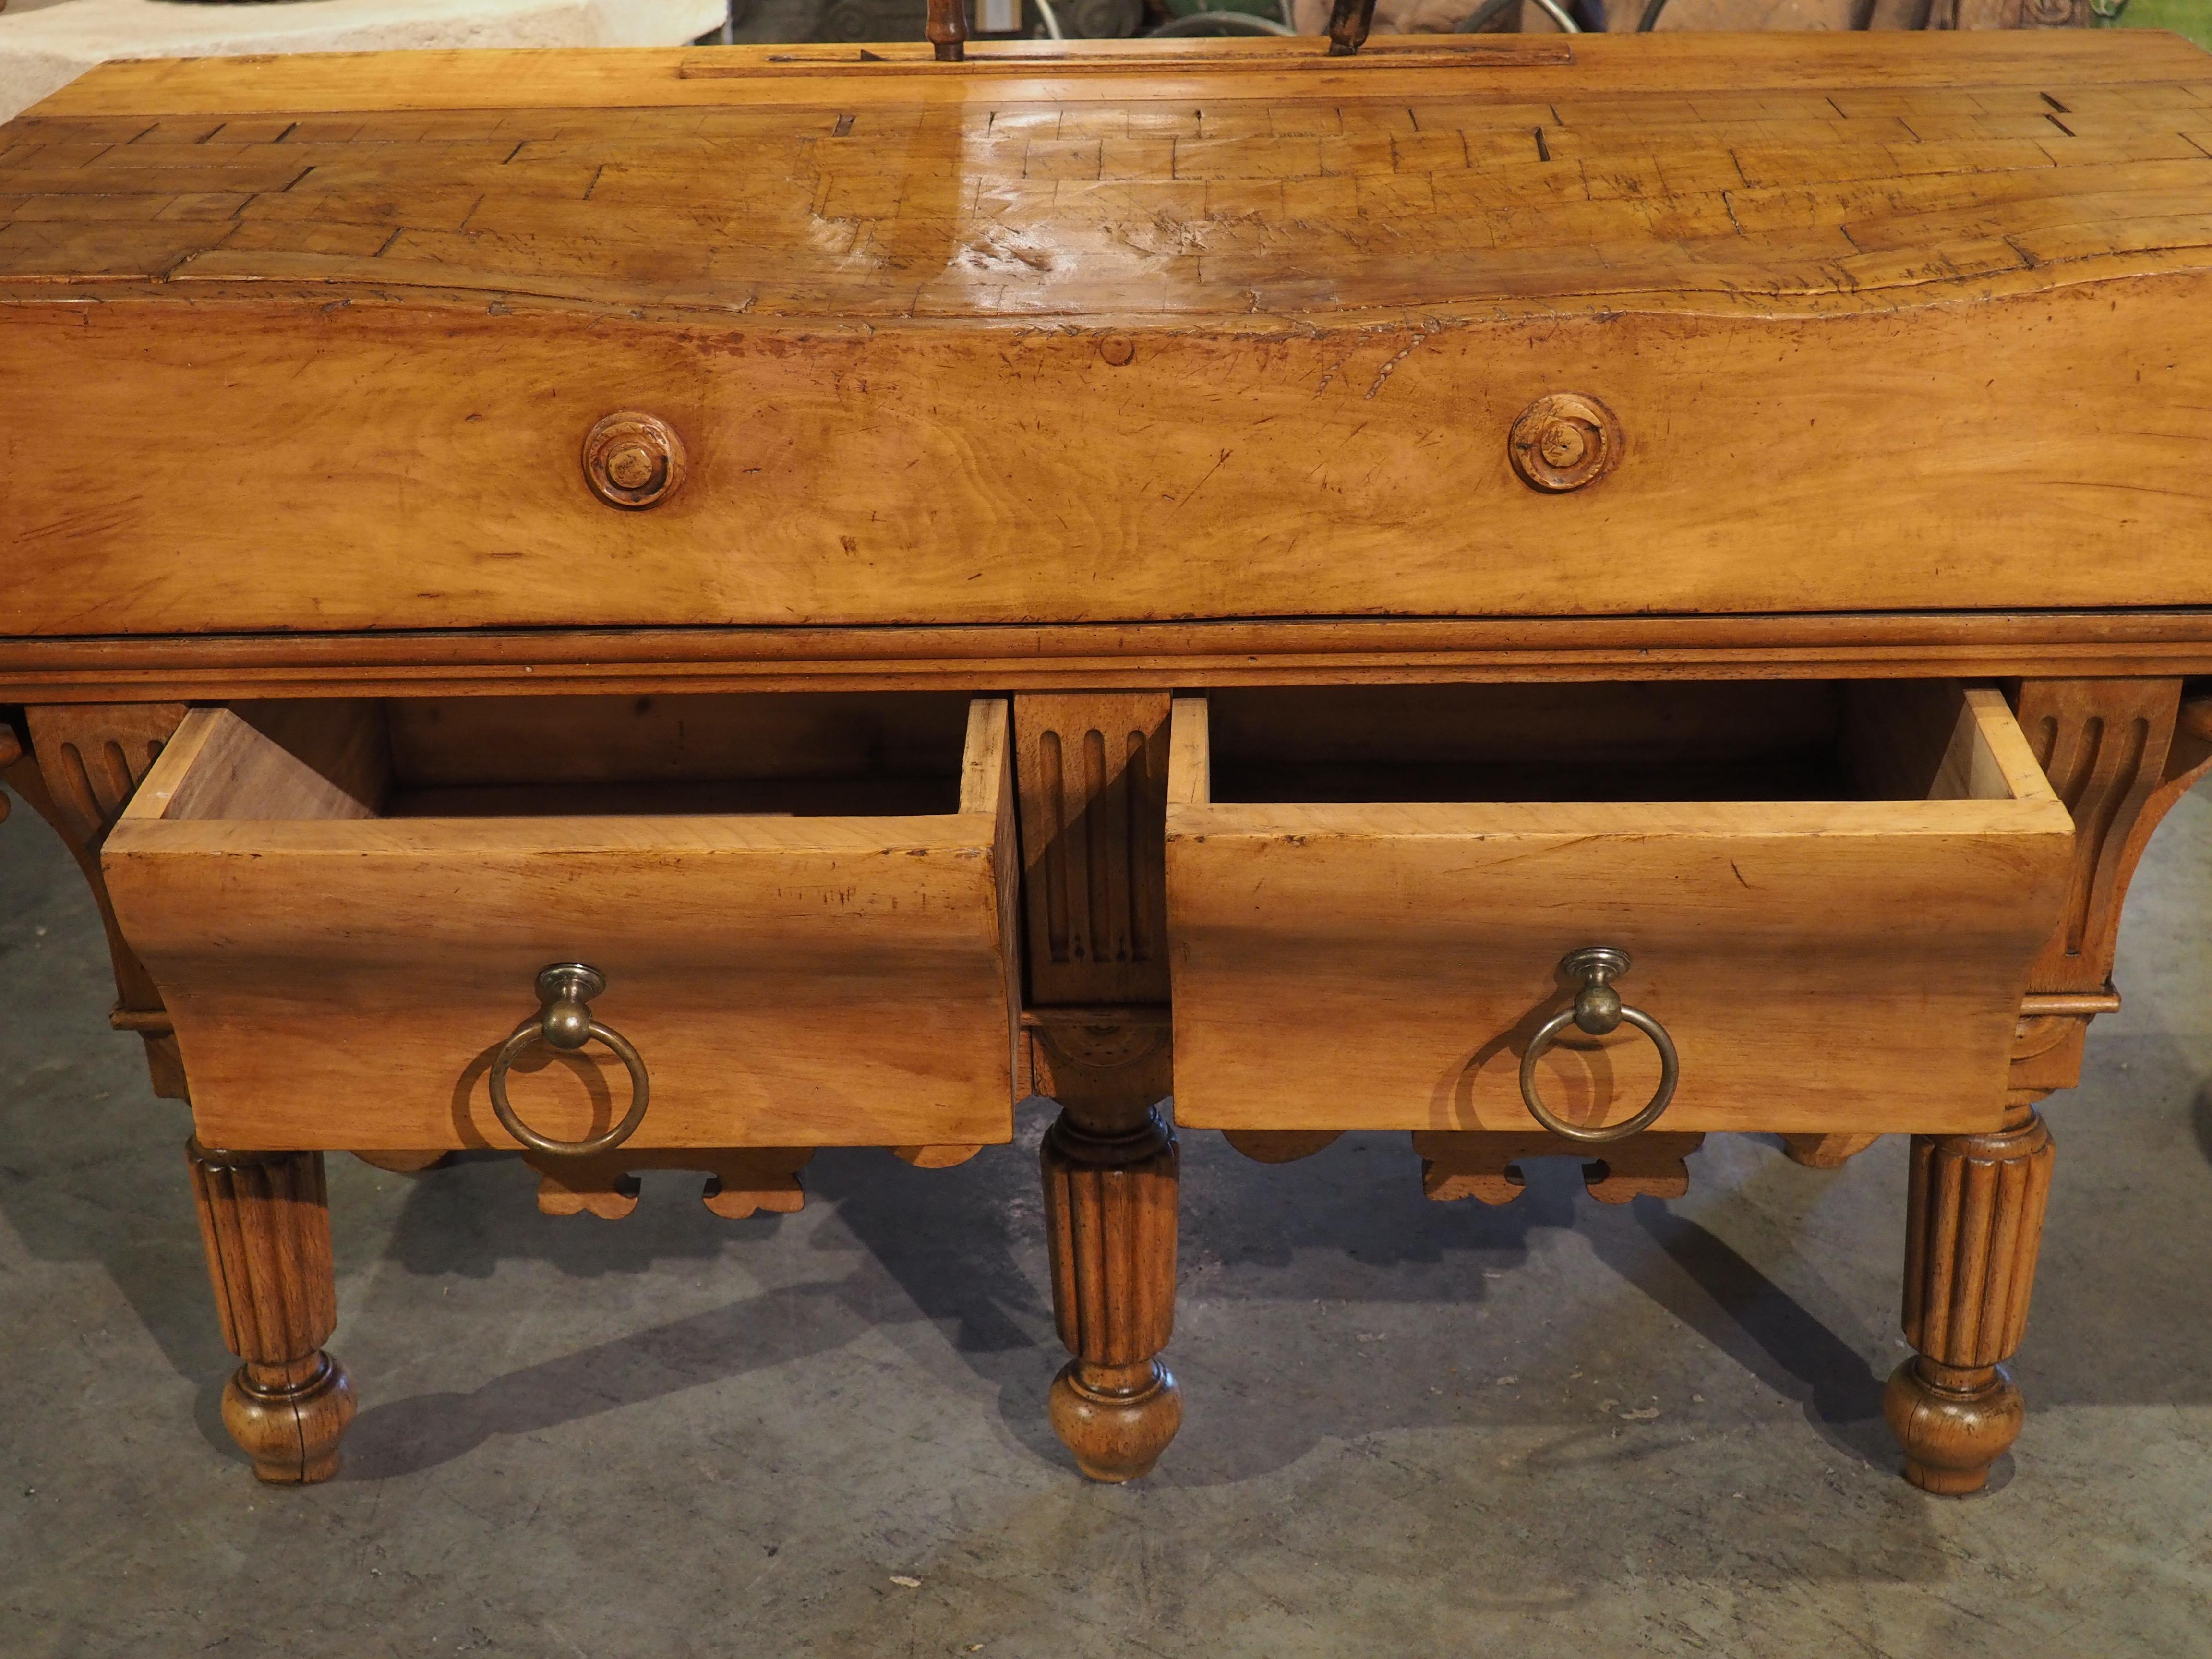 Hand carved from beechwood, this large butcher block most likely was used in a French boucherie around 1880. Shaped from decades of use (also included are two antique butcher knives, one monogramed “K.B.”, that slot into a raised slot in the back),